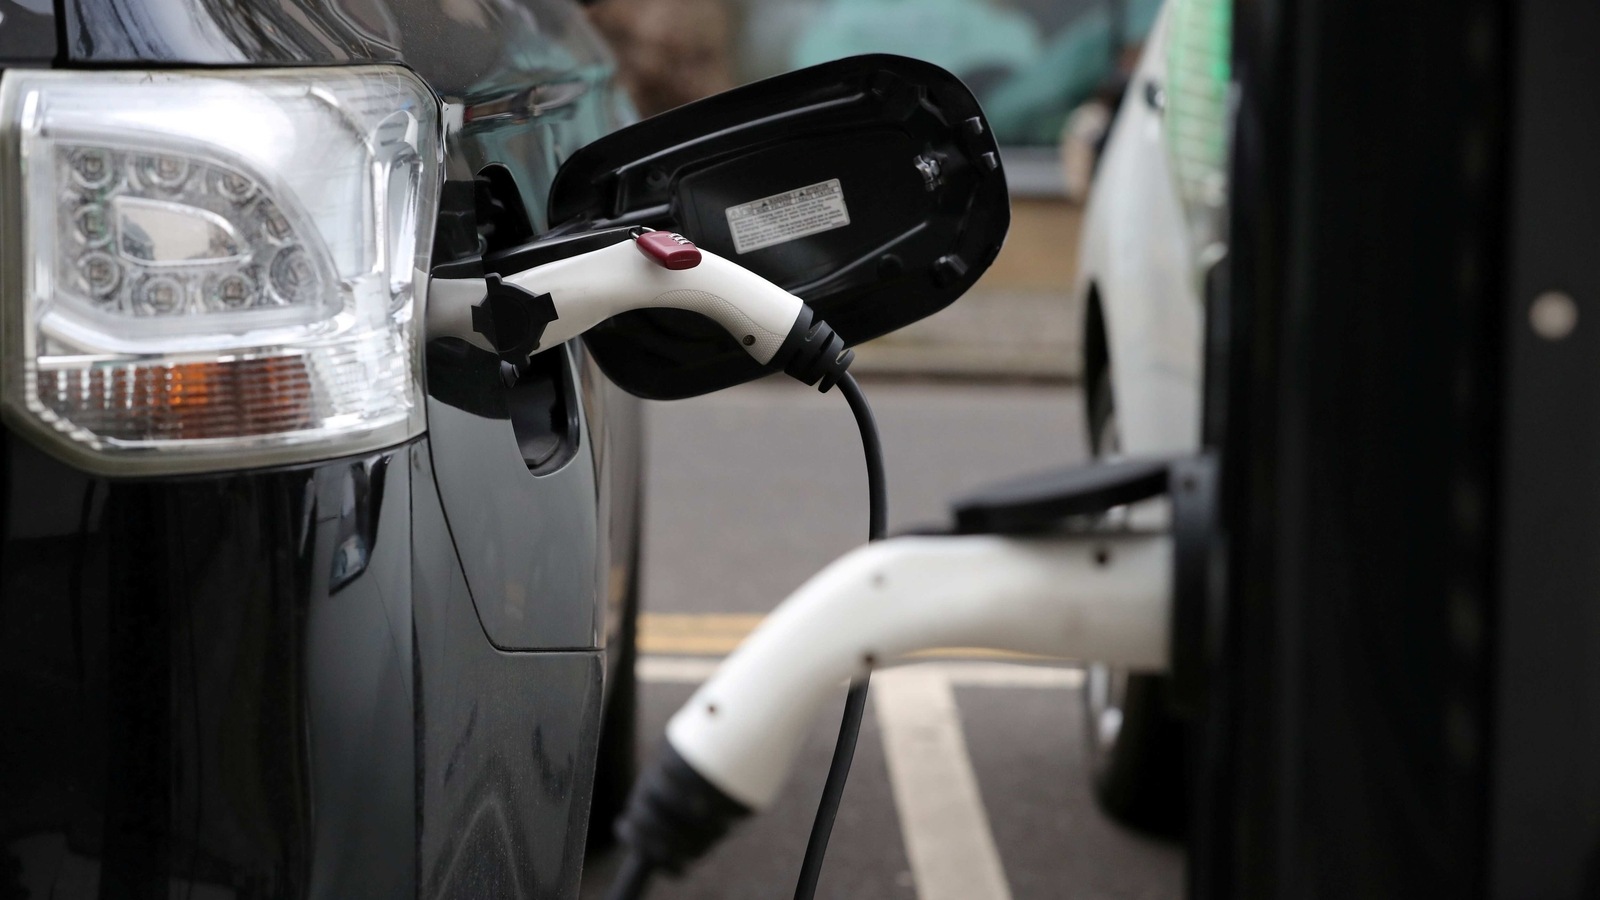 Plan to adopt 100 EV vehicles for service fleets by 2030 Latest News